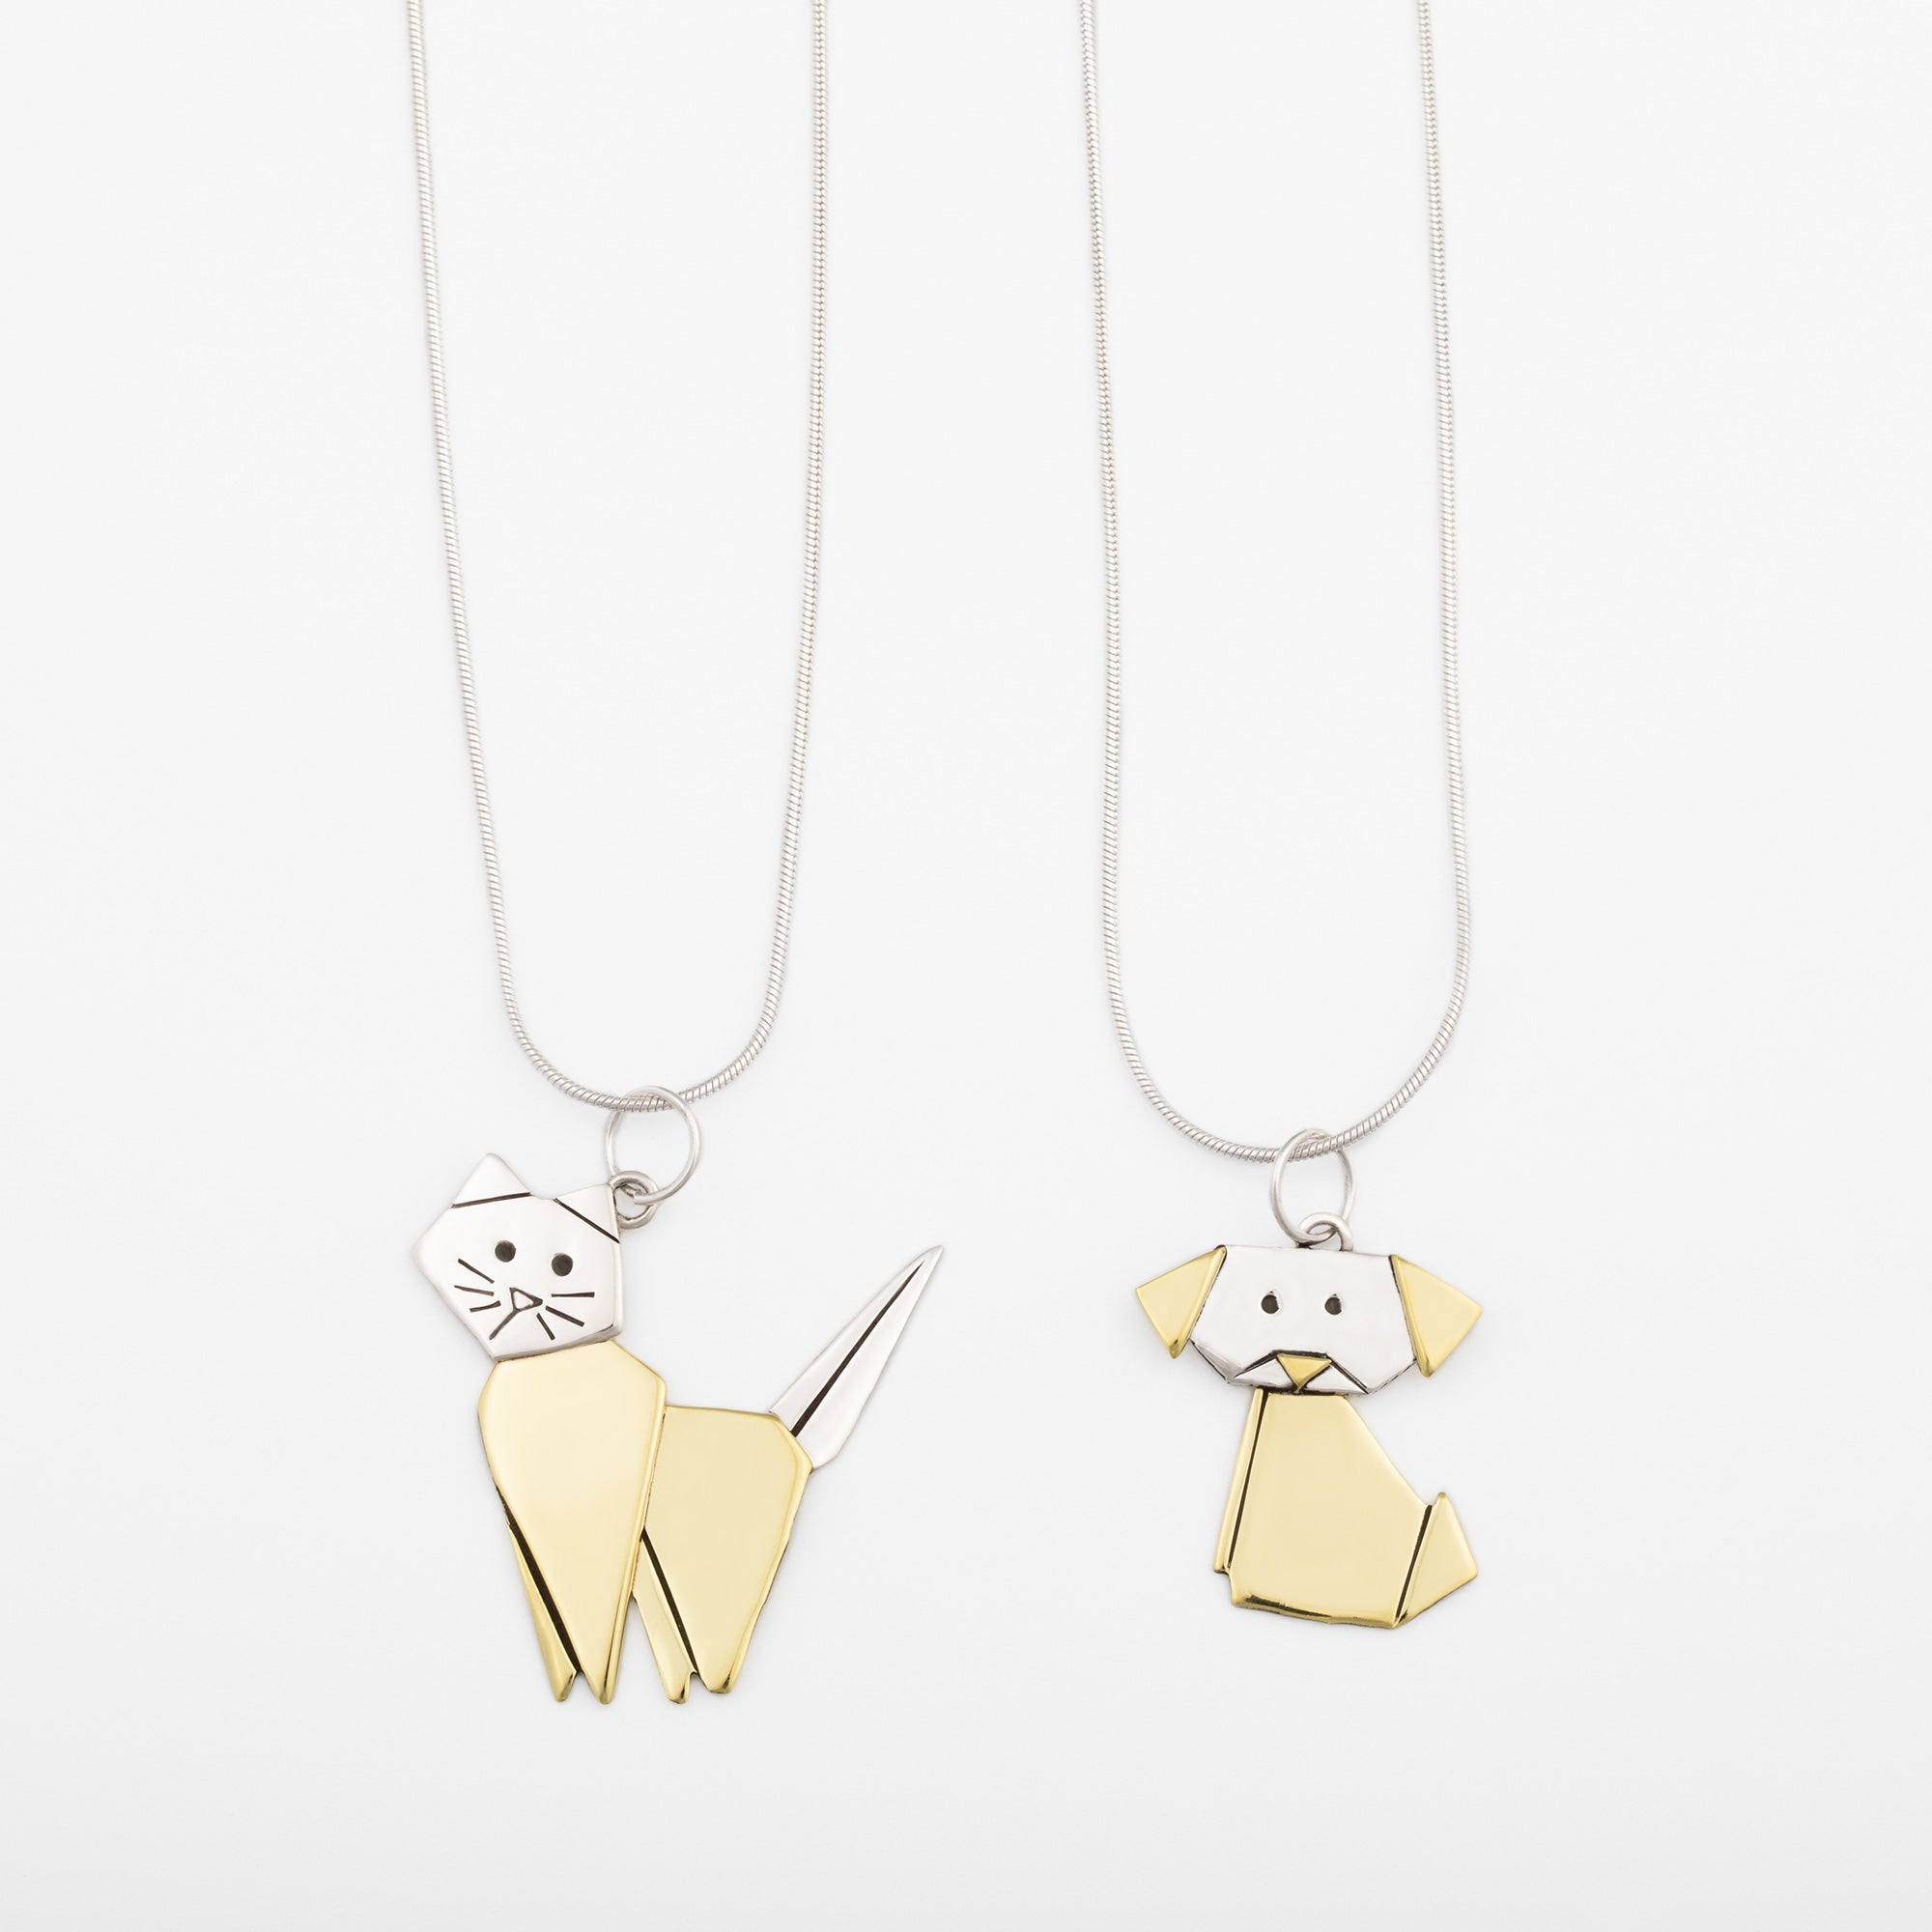 Origami Pet Necklace - Cat - With Sterling Cable Chain